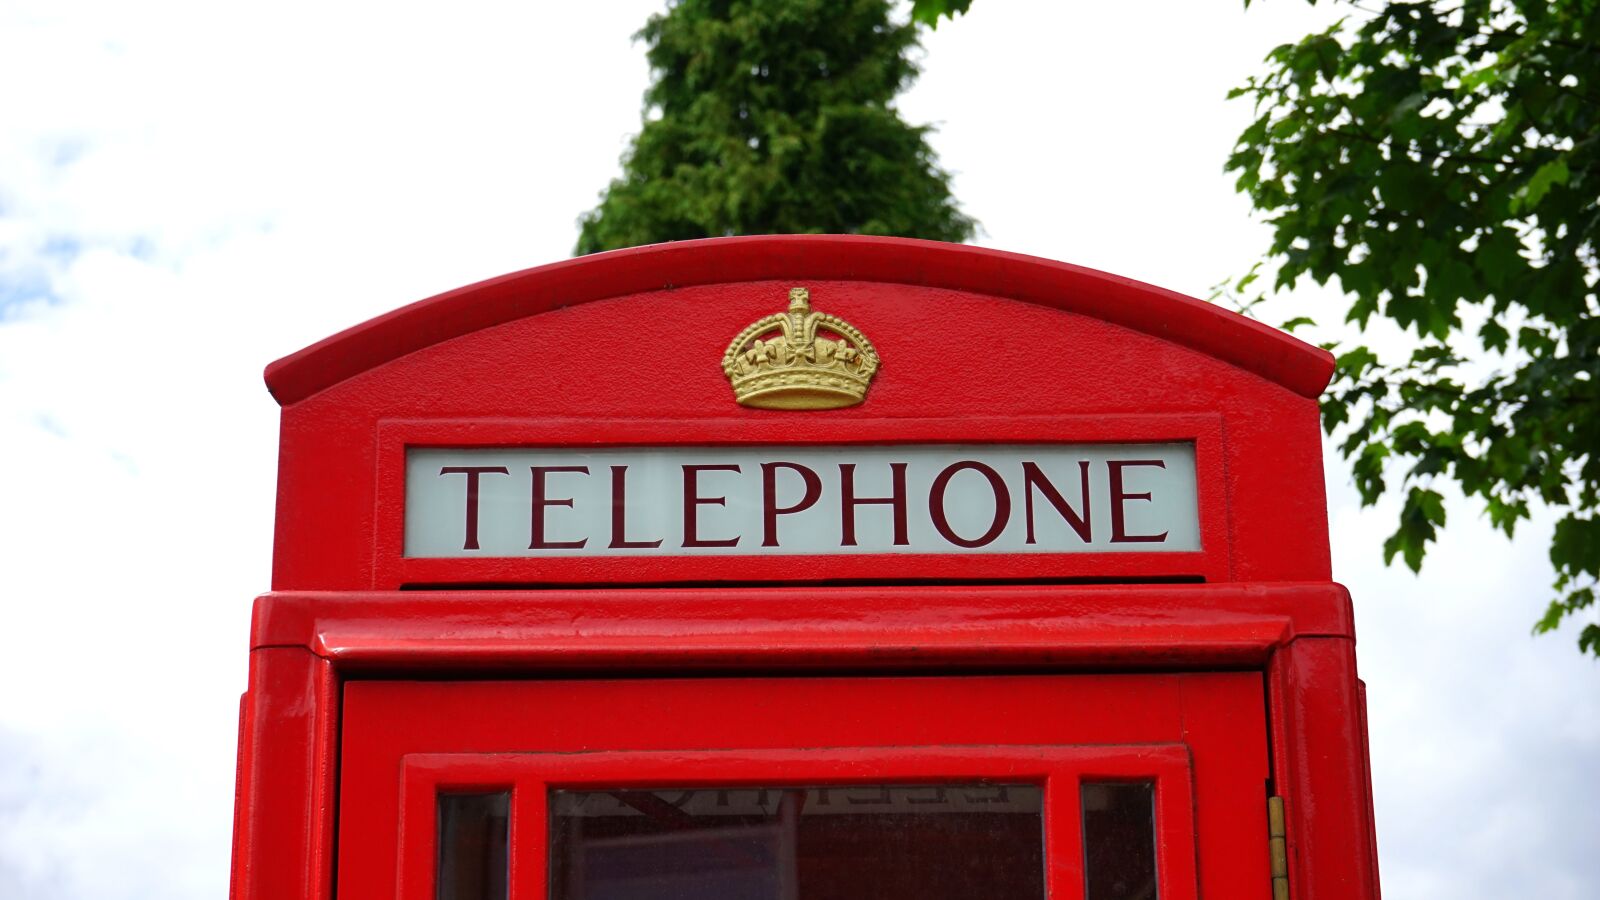 Sony a7 sample photo. British, telephone, red photography